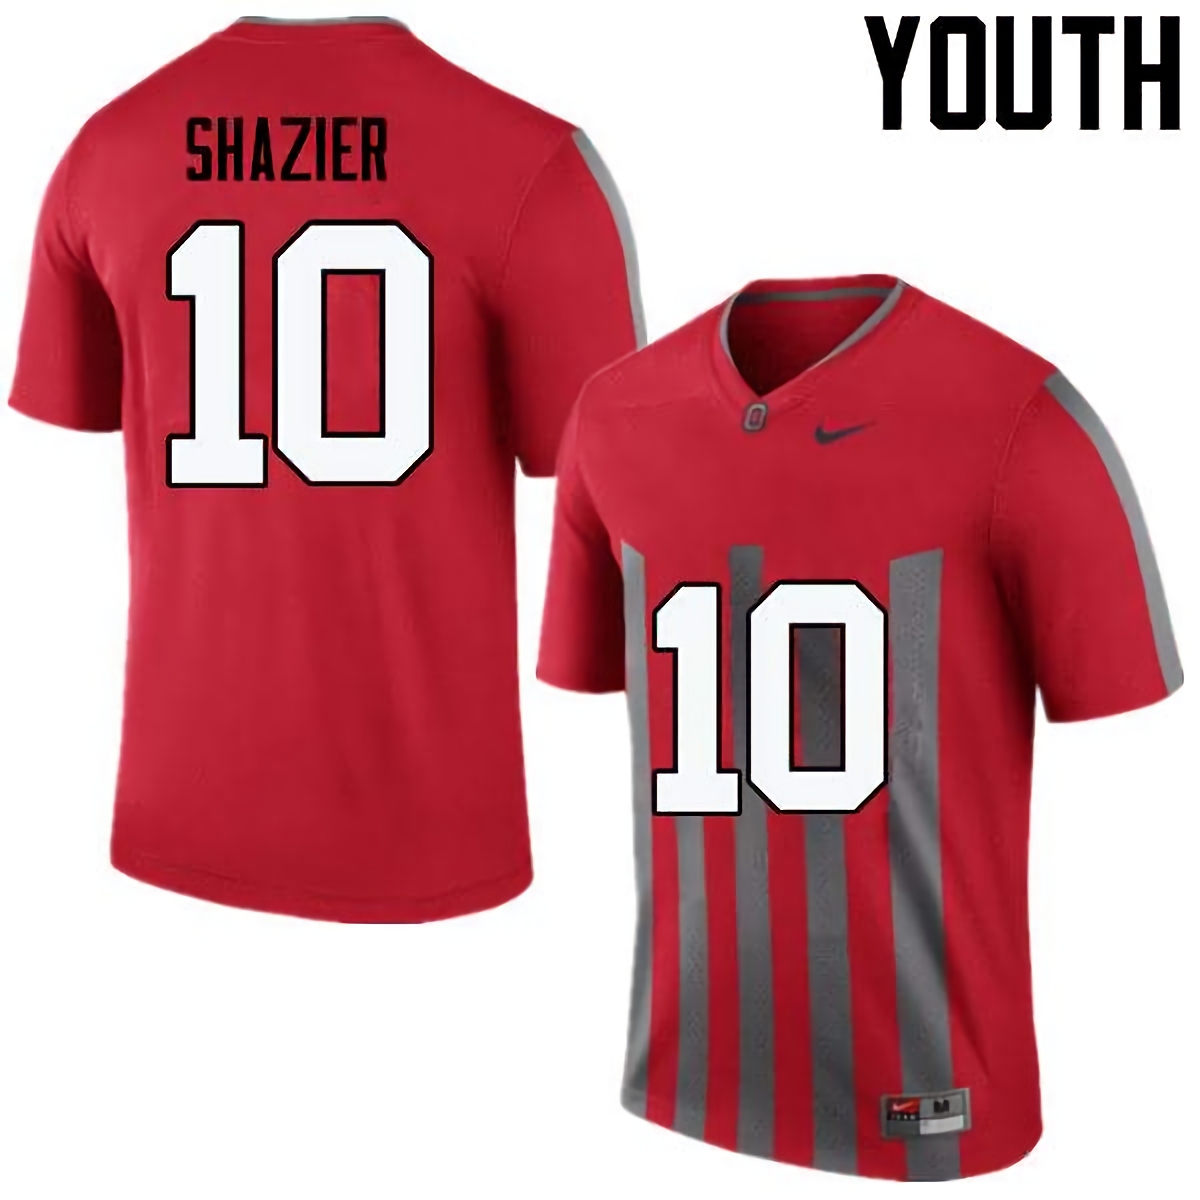 Ryan Shazier Ohio State Buckeyes Youth NCAA #10 Nike Throwback Red College Stitched Football Jersey JHX2656UK